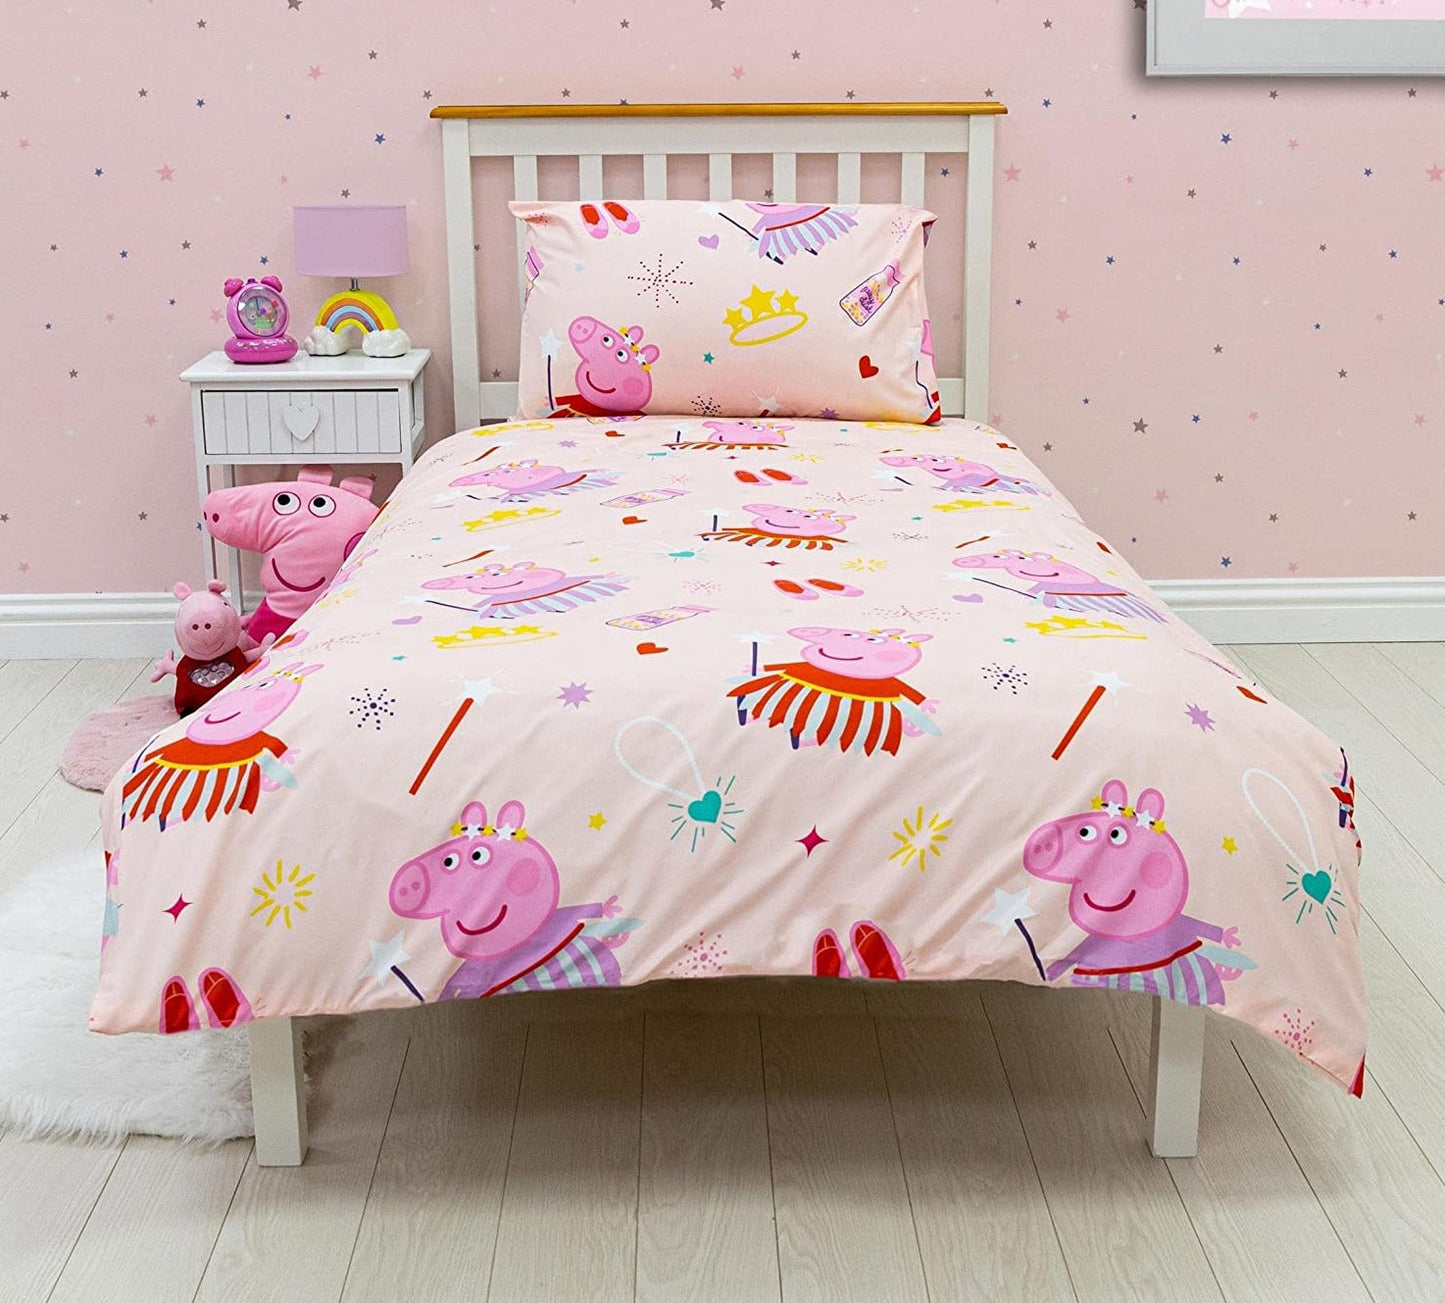 Wholesale x 3 Official Peppa Pig Single Bed 'Magic' Duvet Cover Set Character Bedding